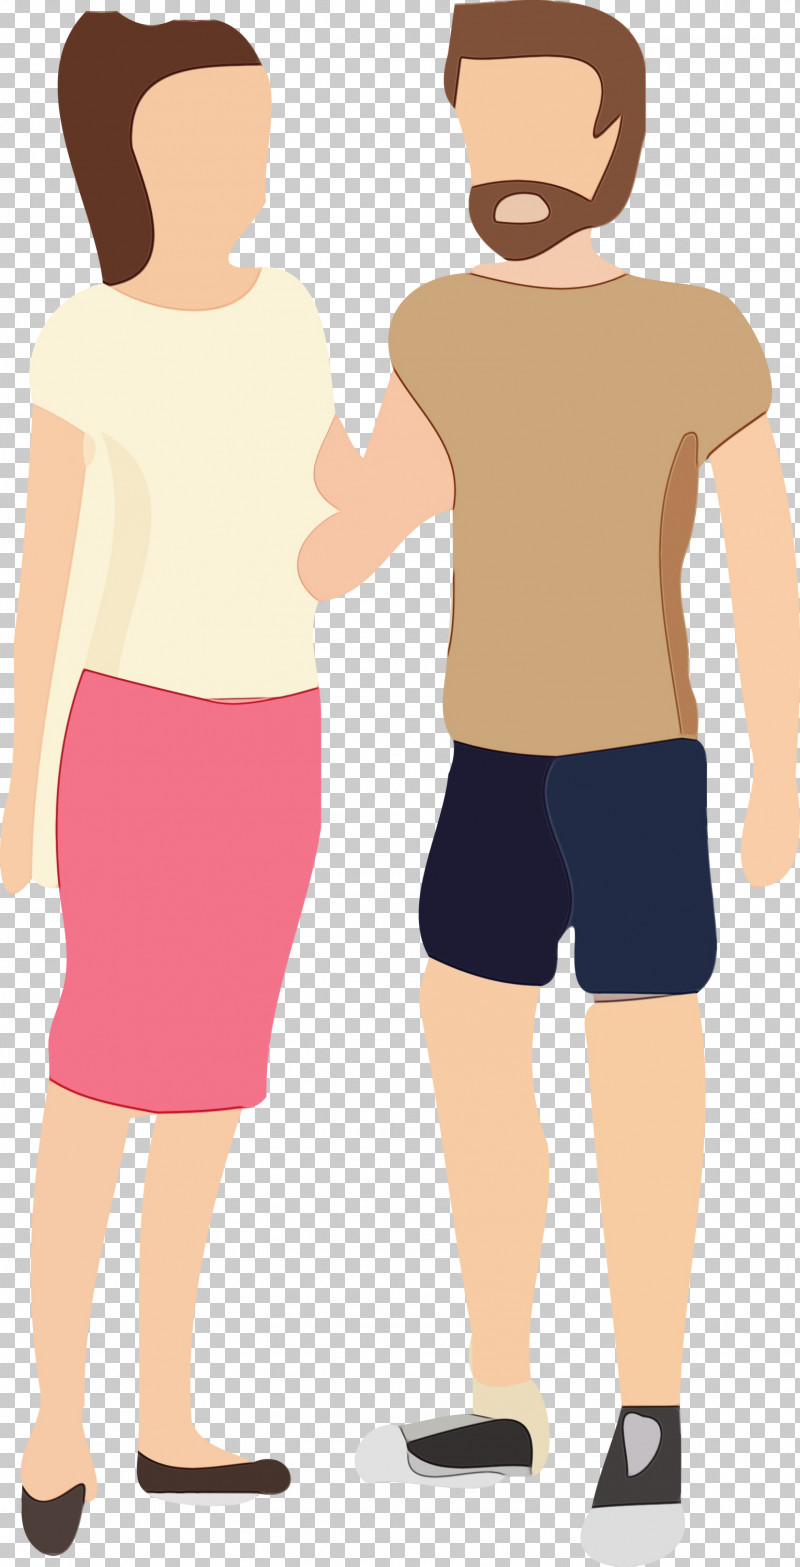 Holding Hands PNG, Clipart, Child, Clothing, Couple, Gesture, Holding Hands Free PNG Download